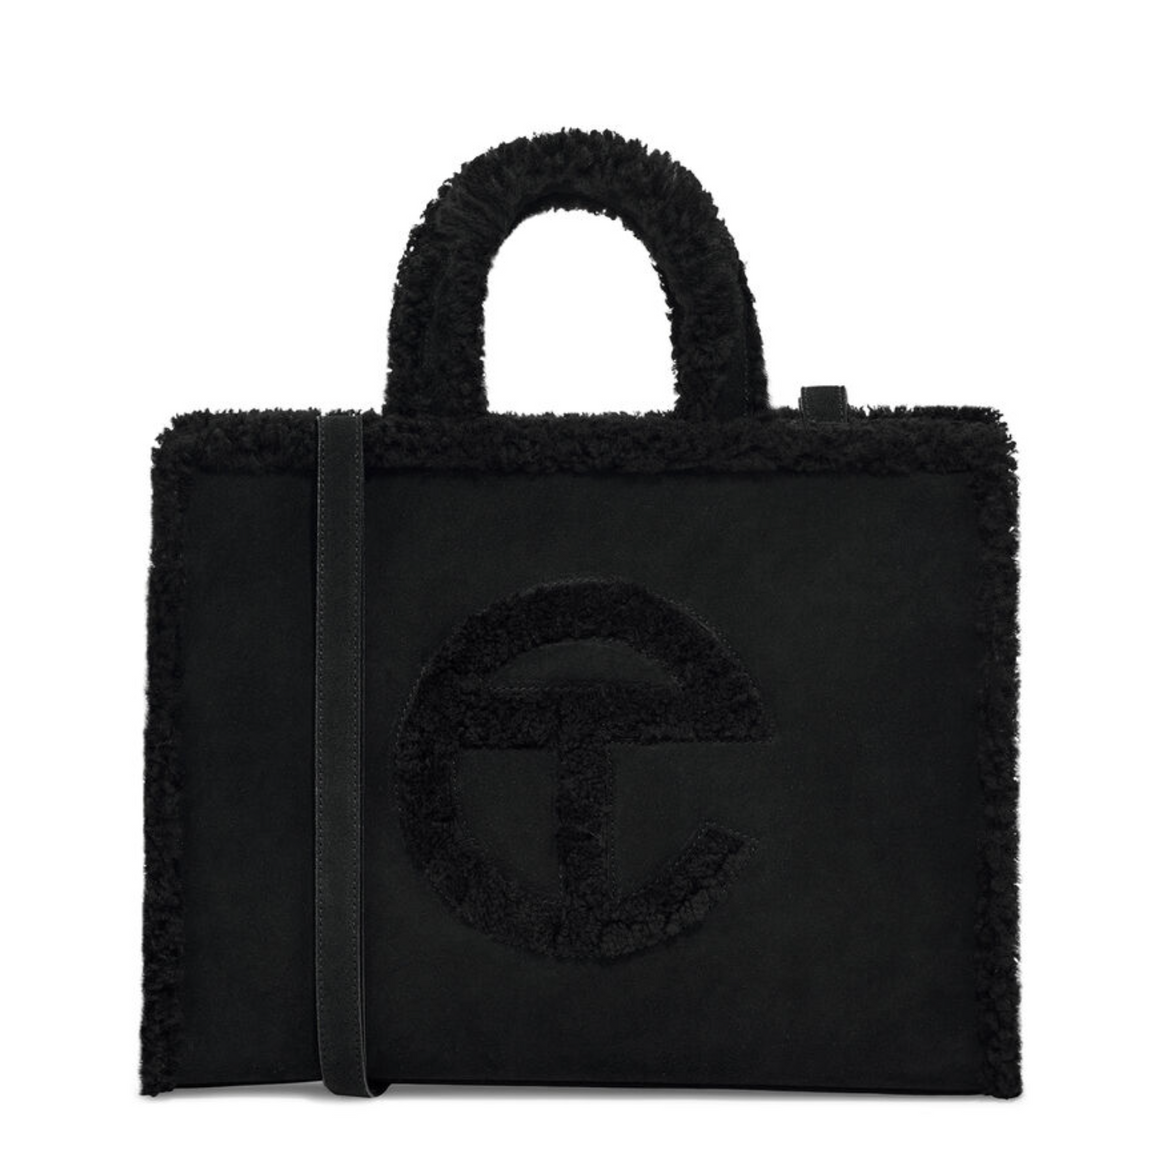 The Cutest Collaboration Yet: New UGG x Telfar Bags are Here | The Sole ...